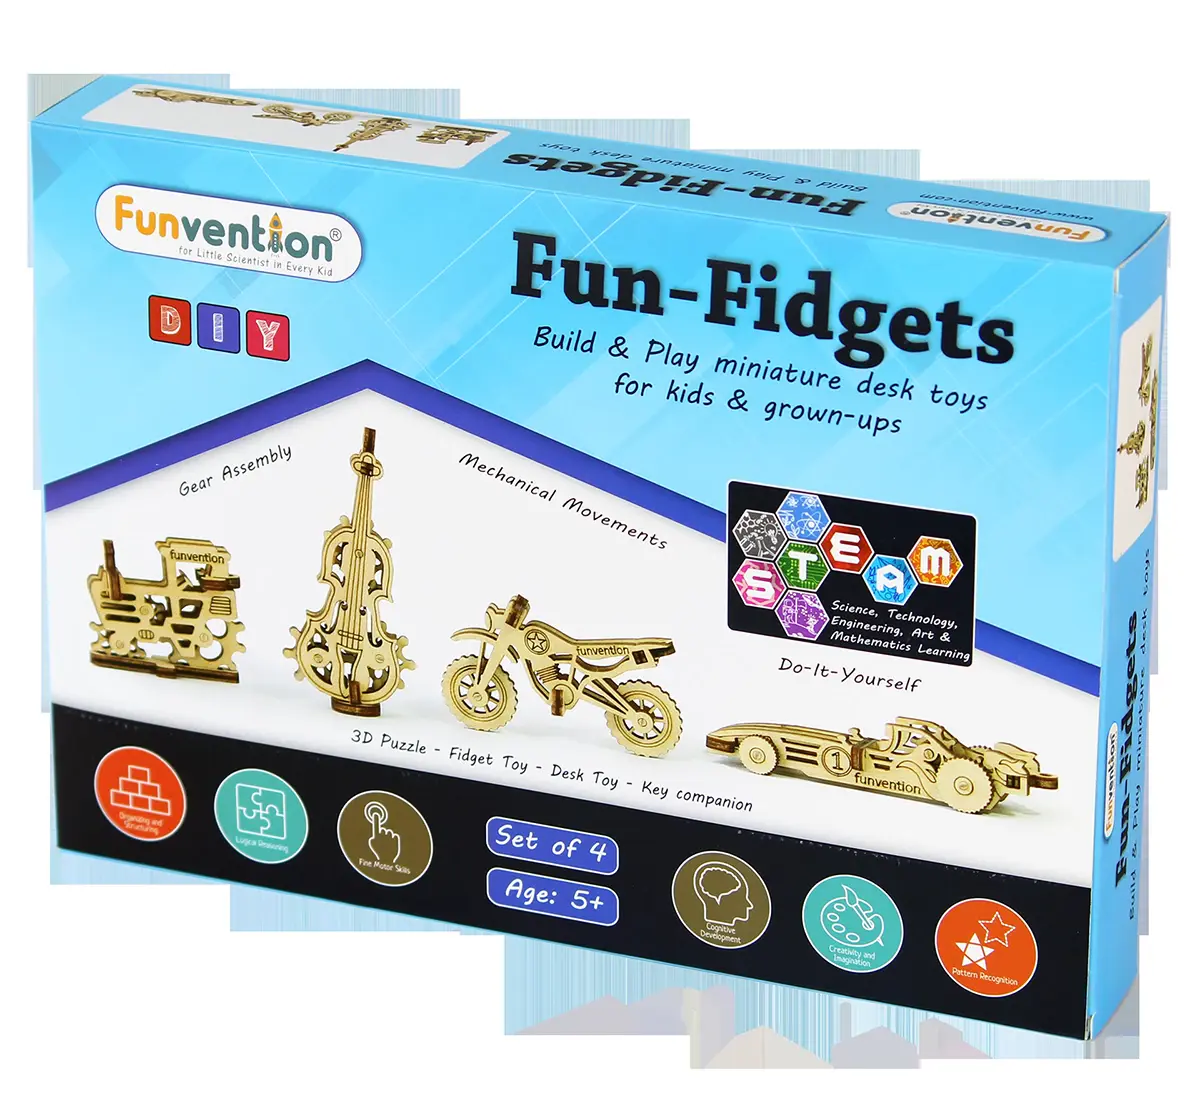 Funvention Fun Fidgets - Assorted - Set Of 4 Model Stem for Kids Age 5Y+